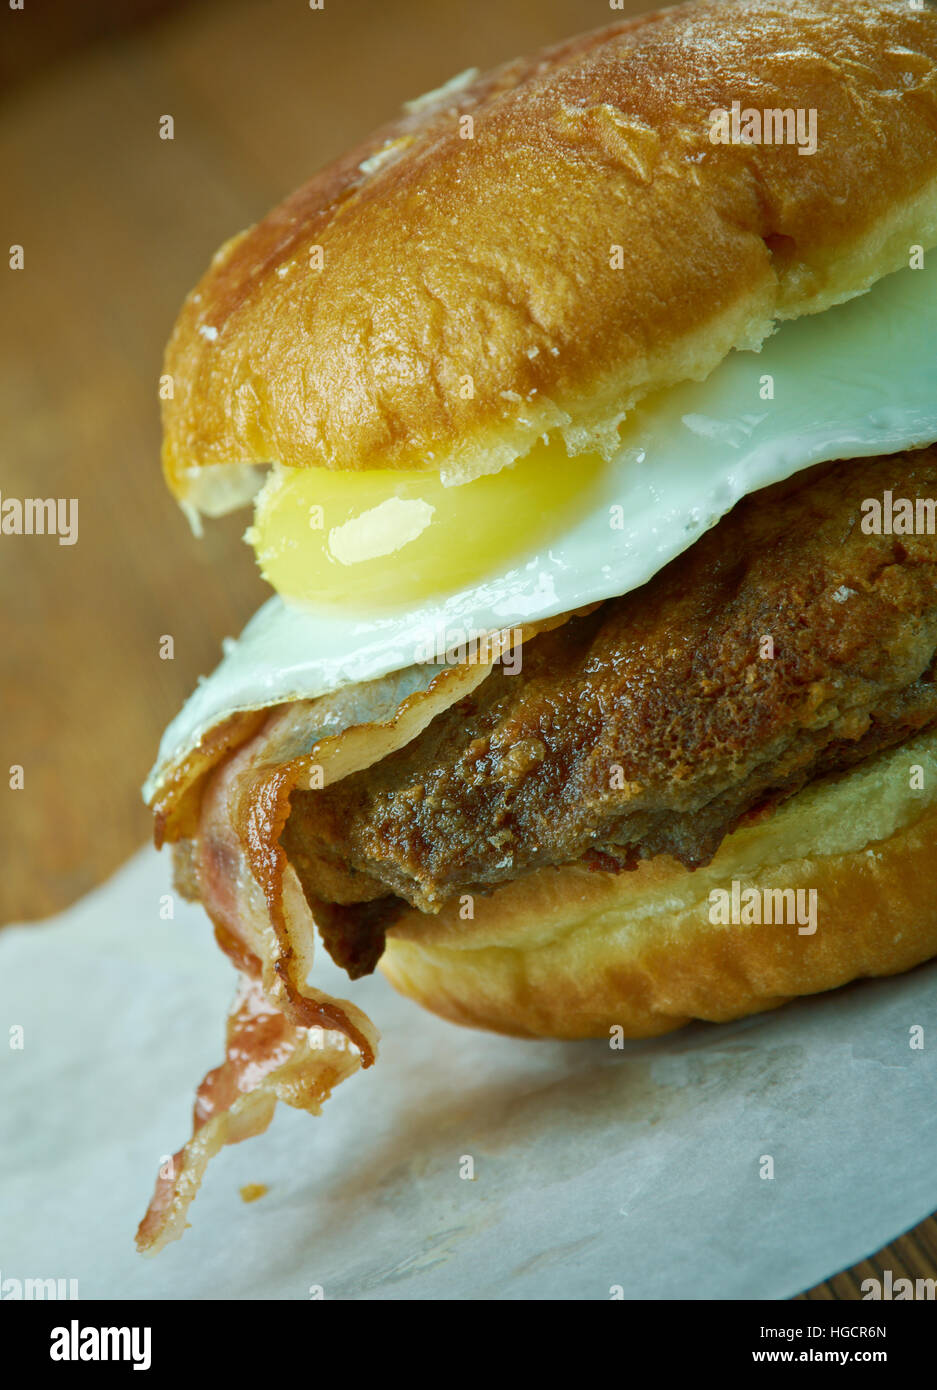 Luther Burger - hamburger or cheeseburger with one or more glazed doughnuts in place of the bun. Stock Photo